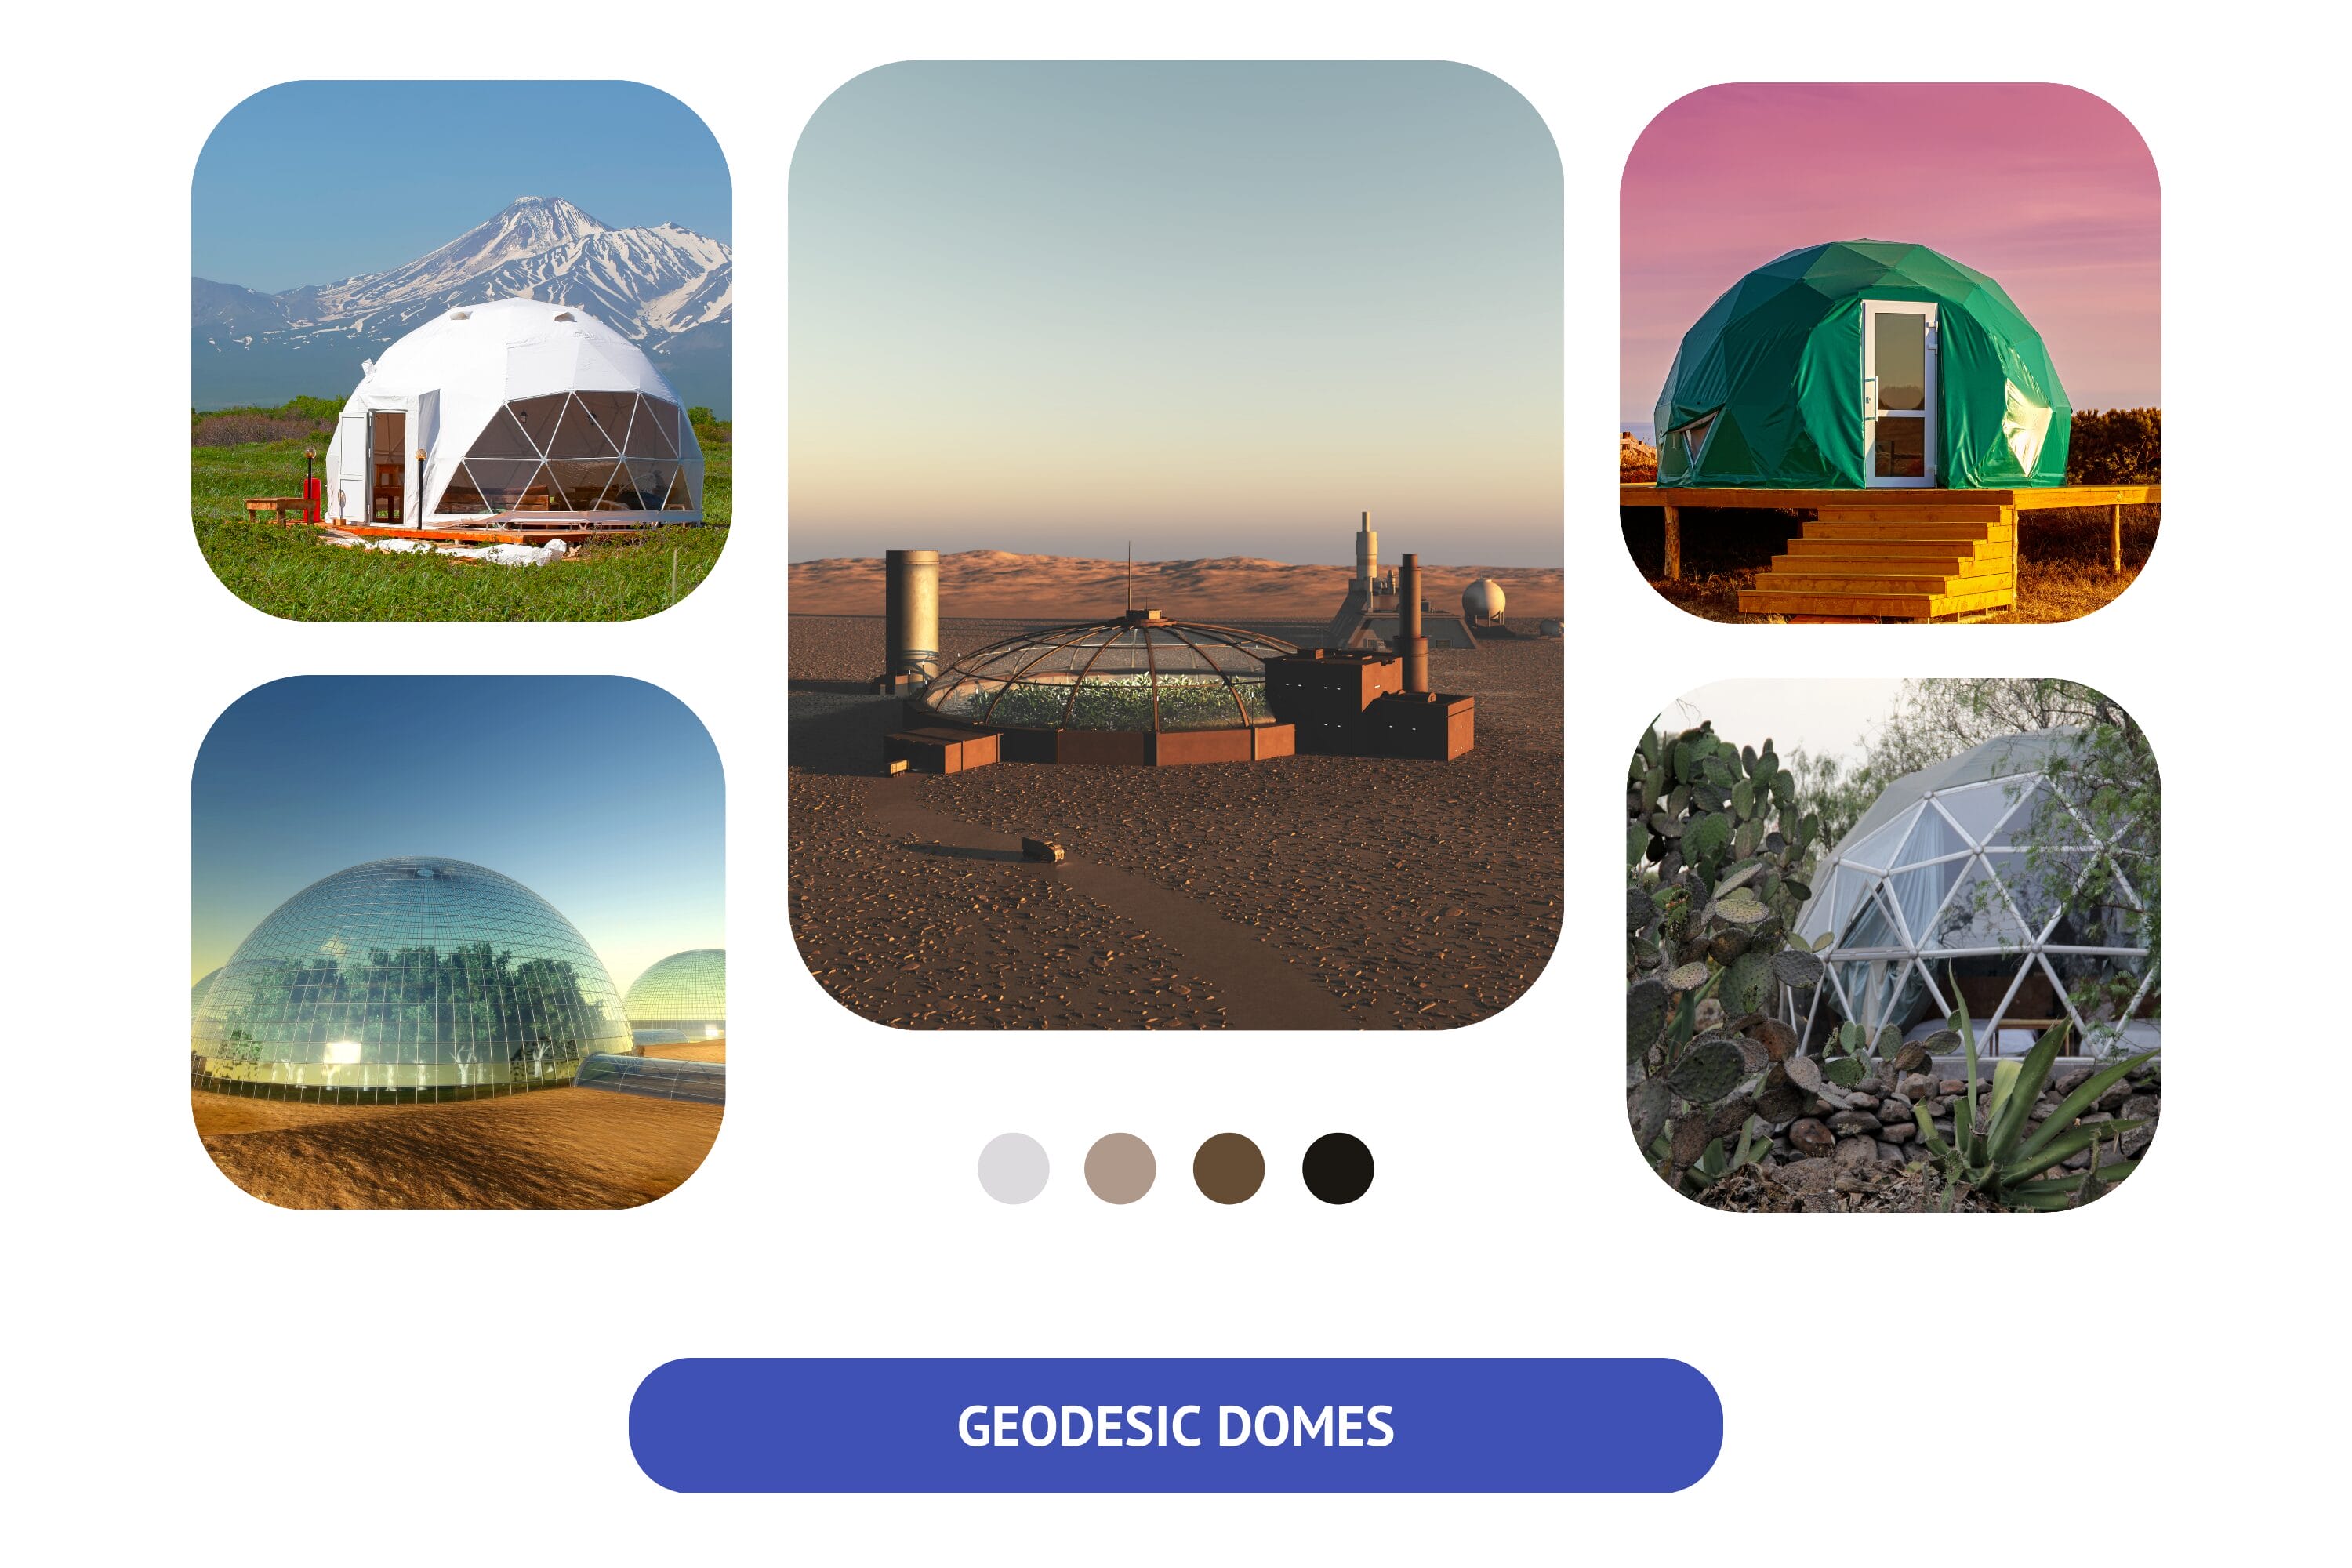 Could you please explain what a geodesic dome is?